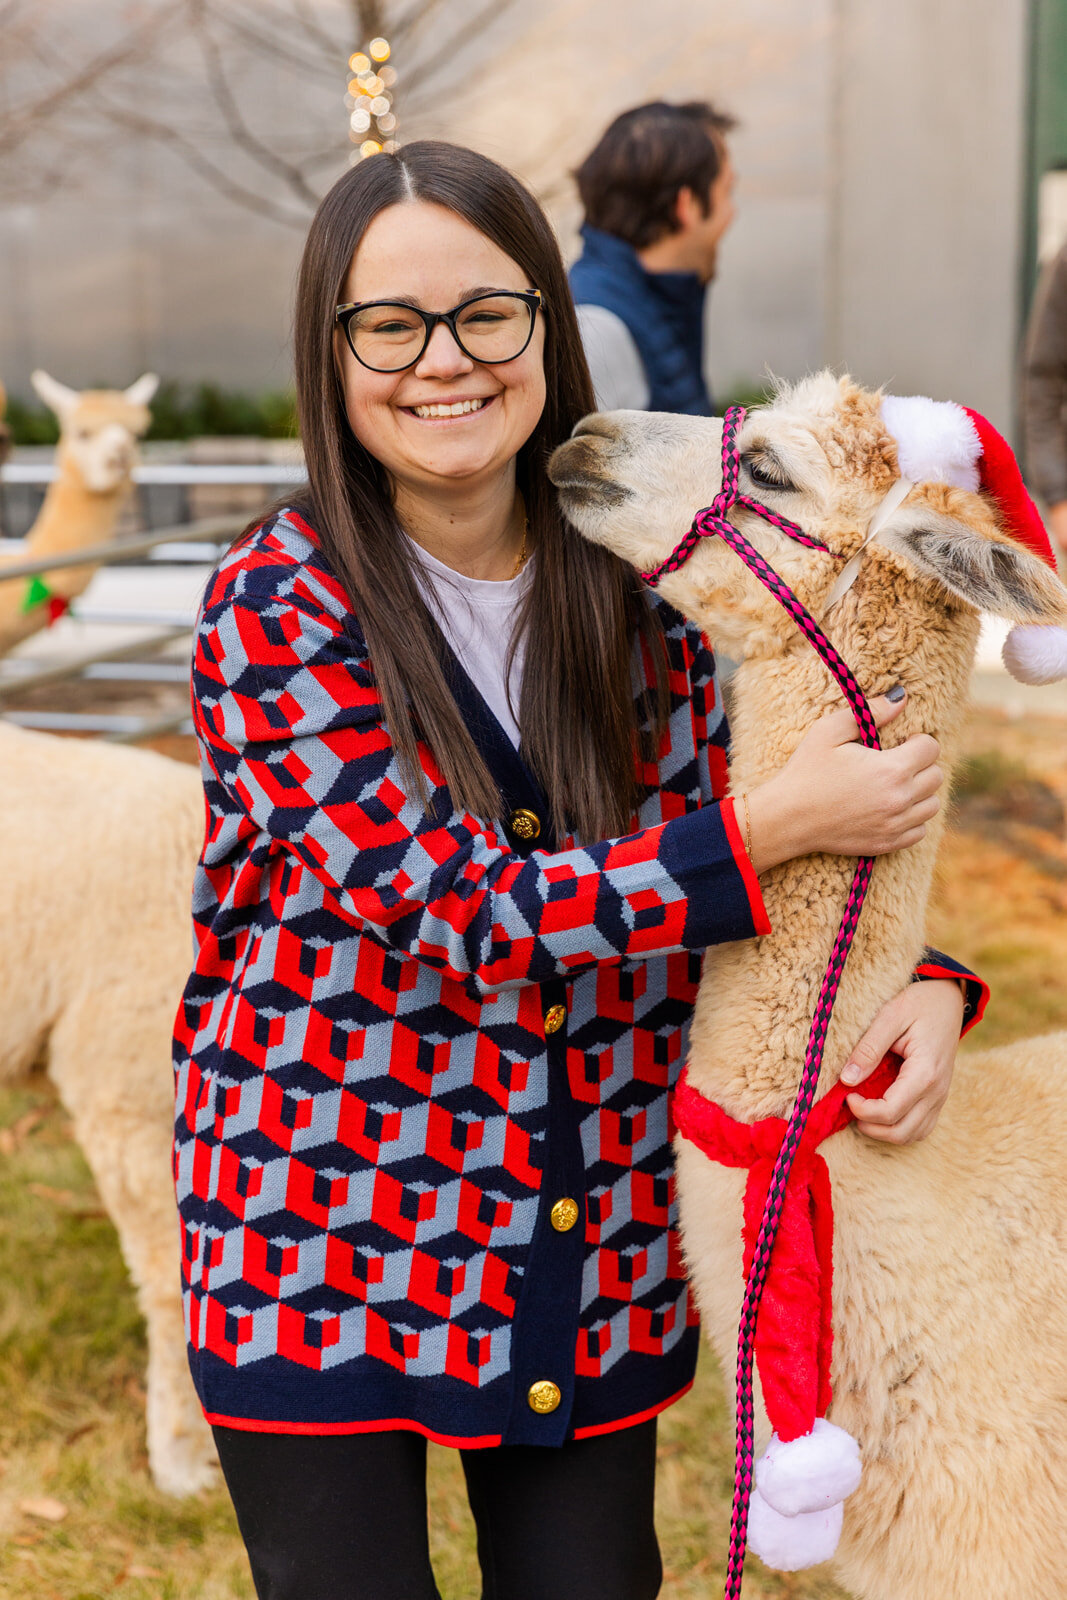 AFC woman employee posing with a lama during building management holiday party event photographer Laure Photography